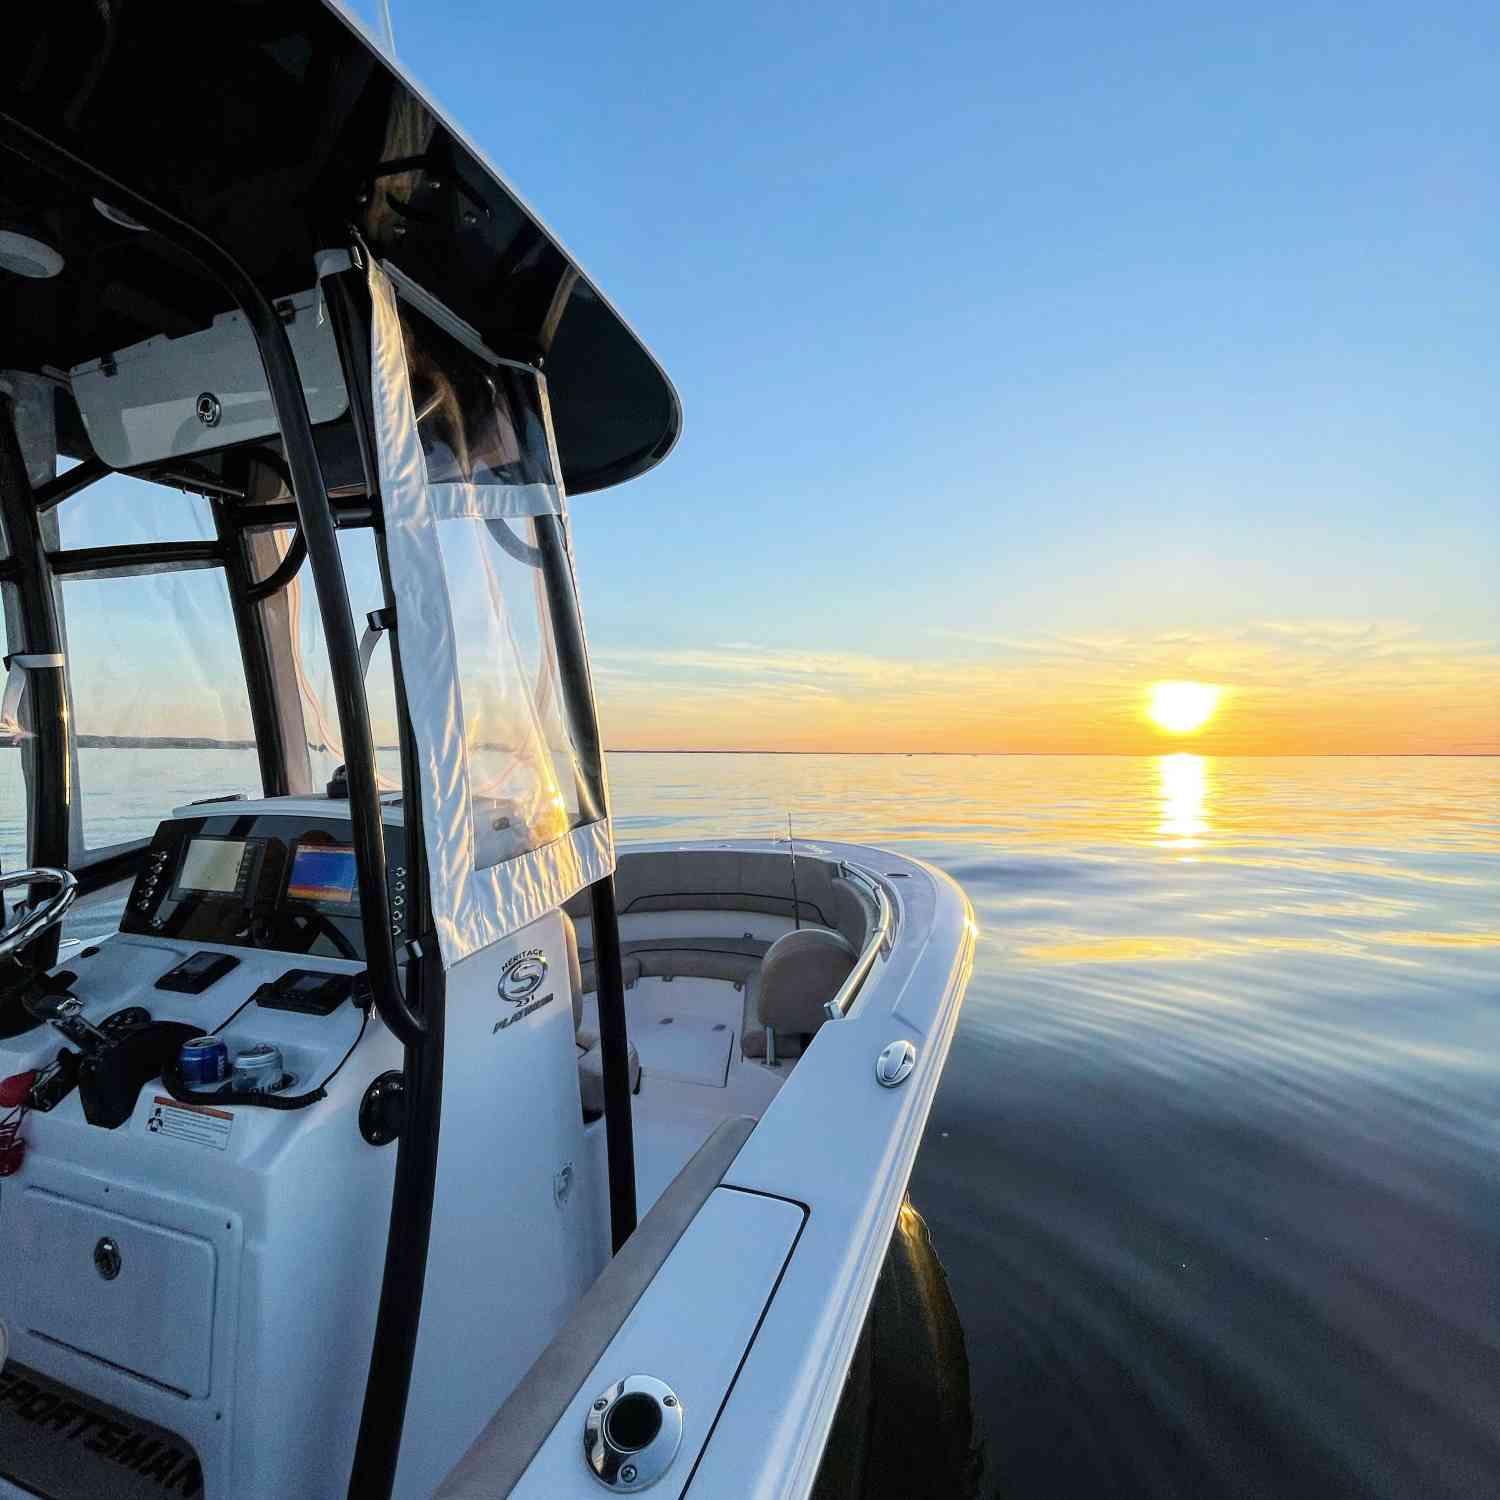 Title: spring nights at the shore - On board their Sportsman Open 232 Center Console - Location: Highlands, NJ. Participating in the Photo Contest #SportsmanMay2021